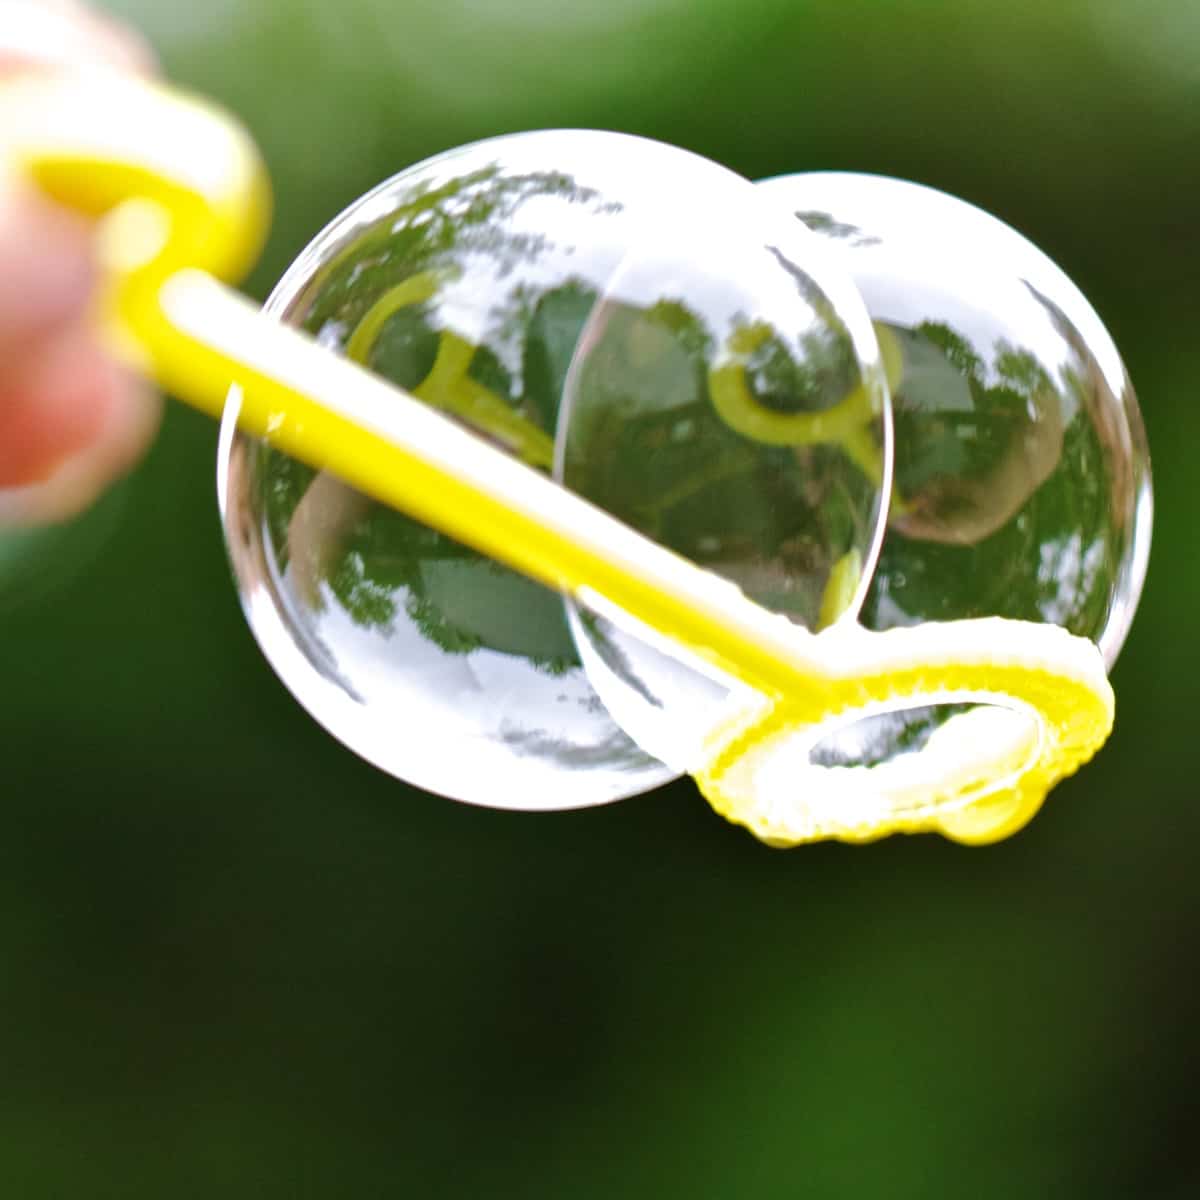 2 bubbles on a yellow wand